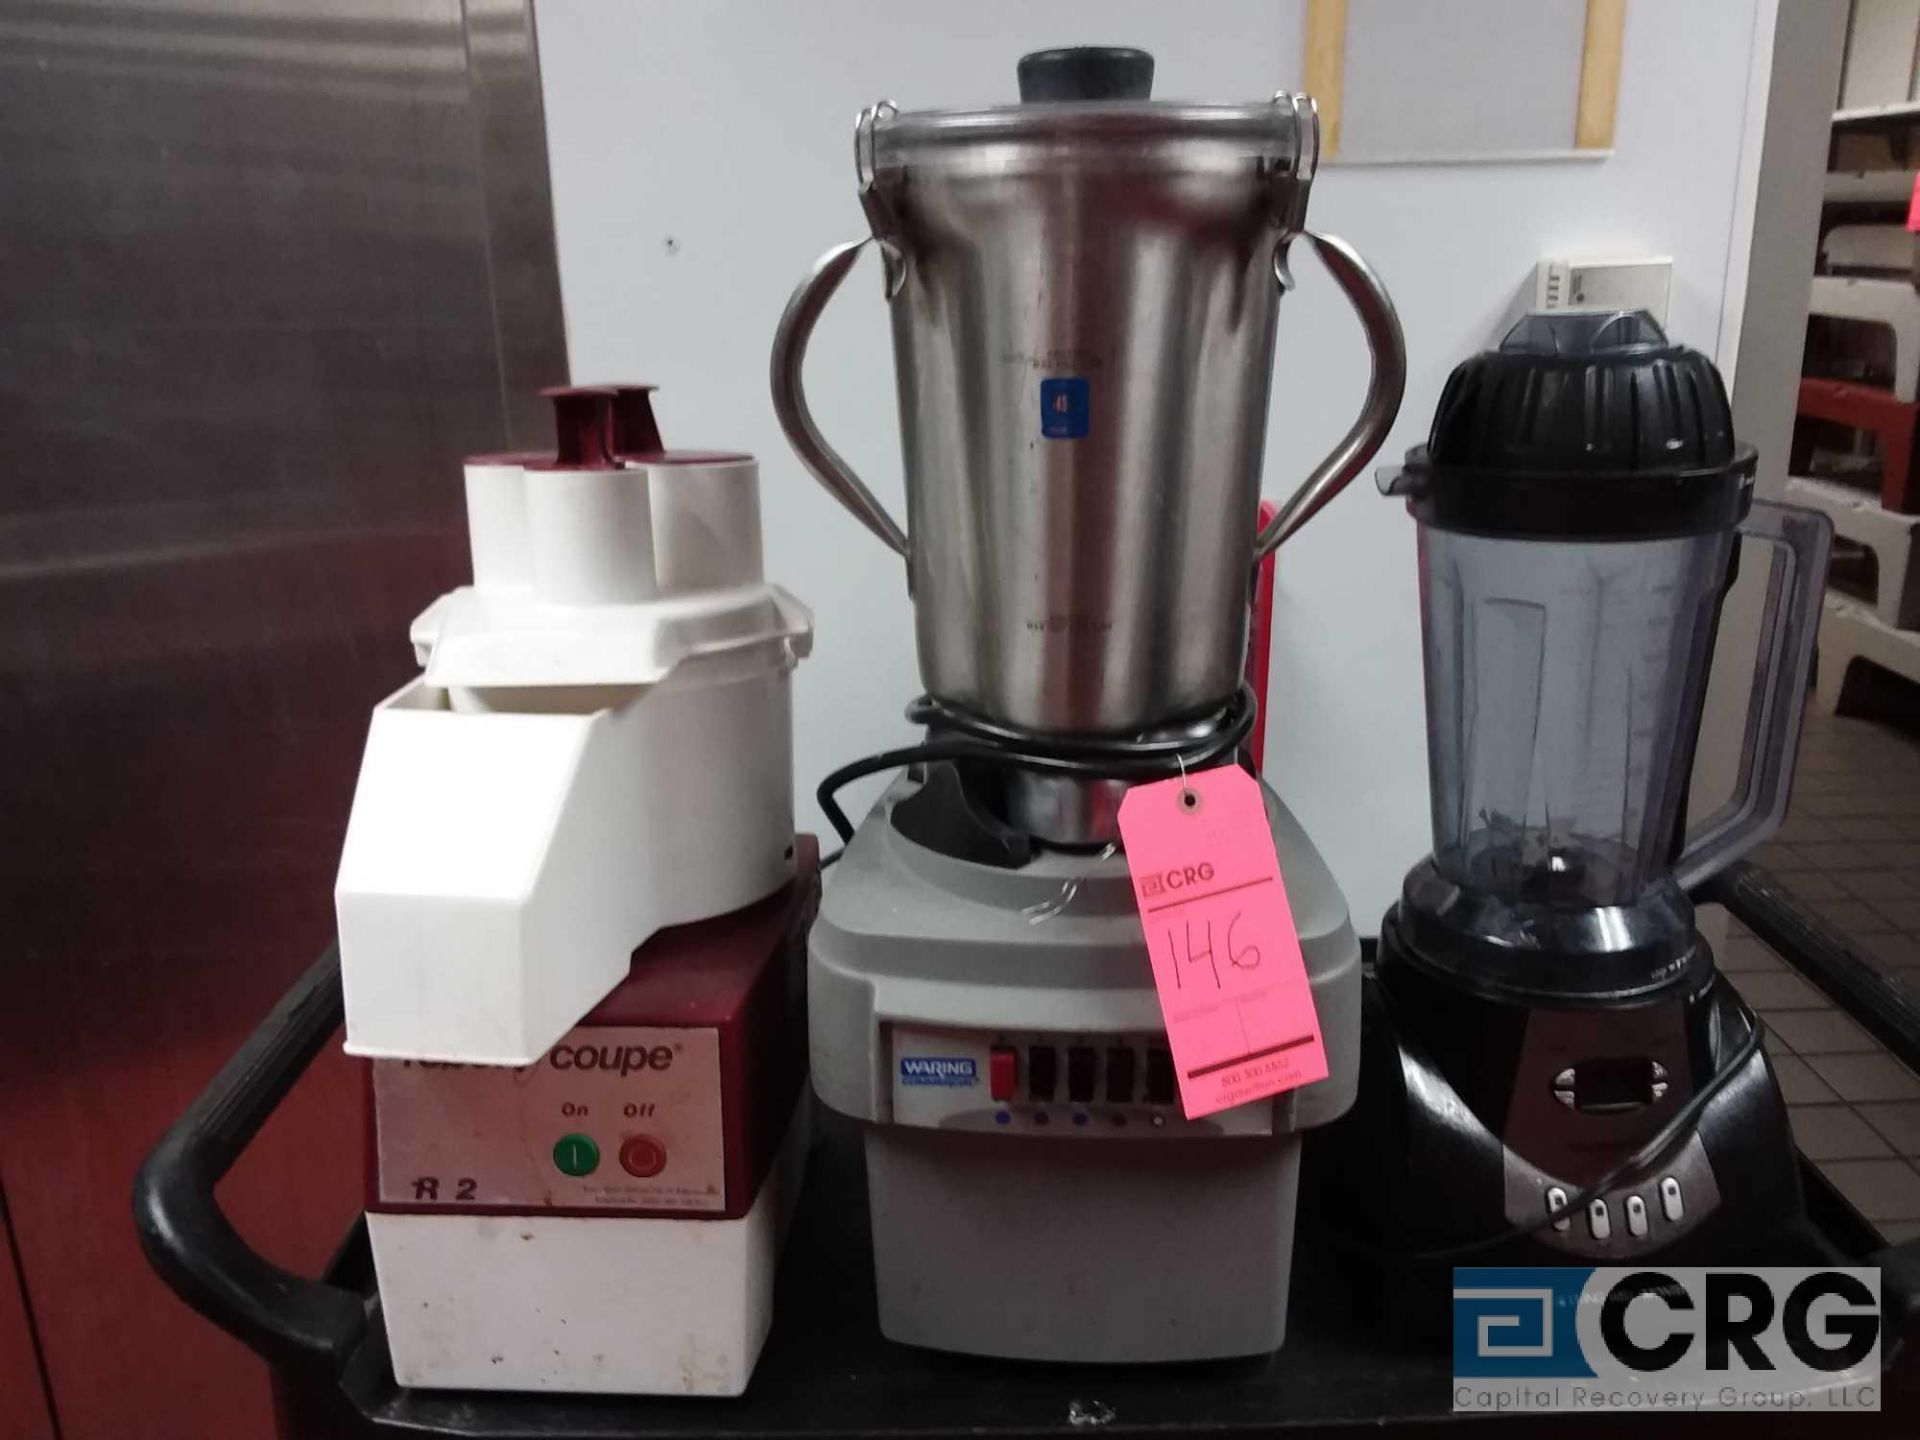 Lot - includes Montel Commercial Blender, a Waring Commercial Blender, and a Robot Coupe juicer, - Image 2 of 2